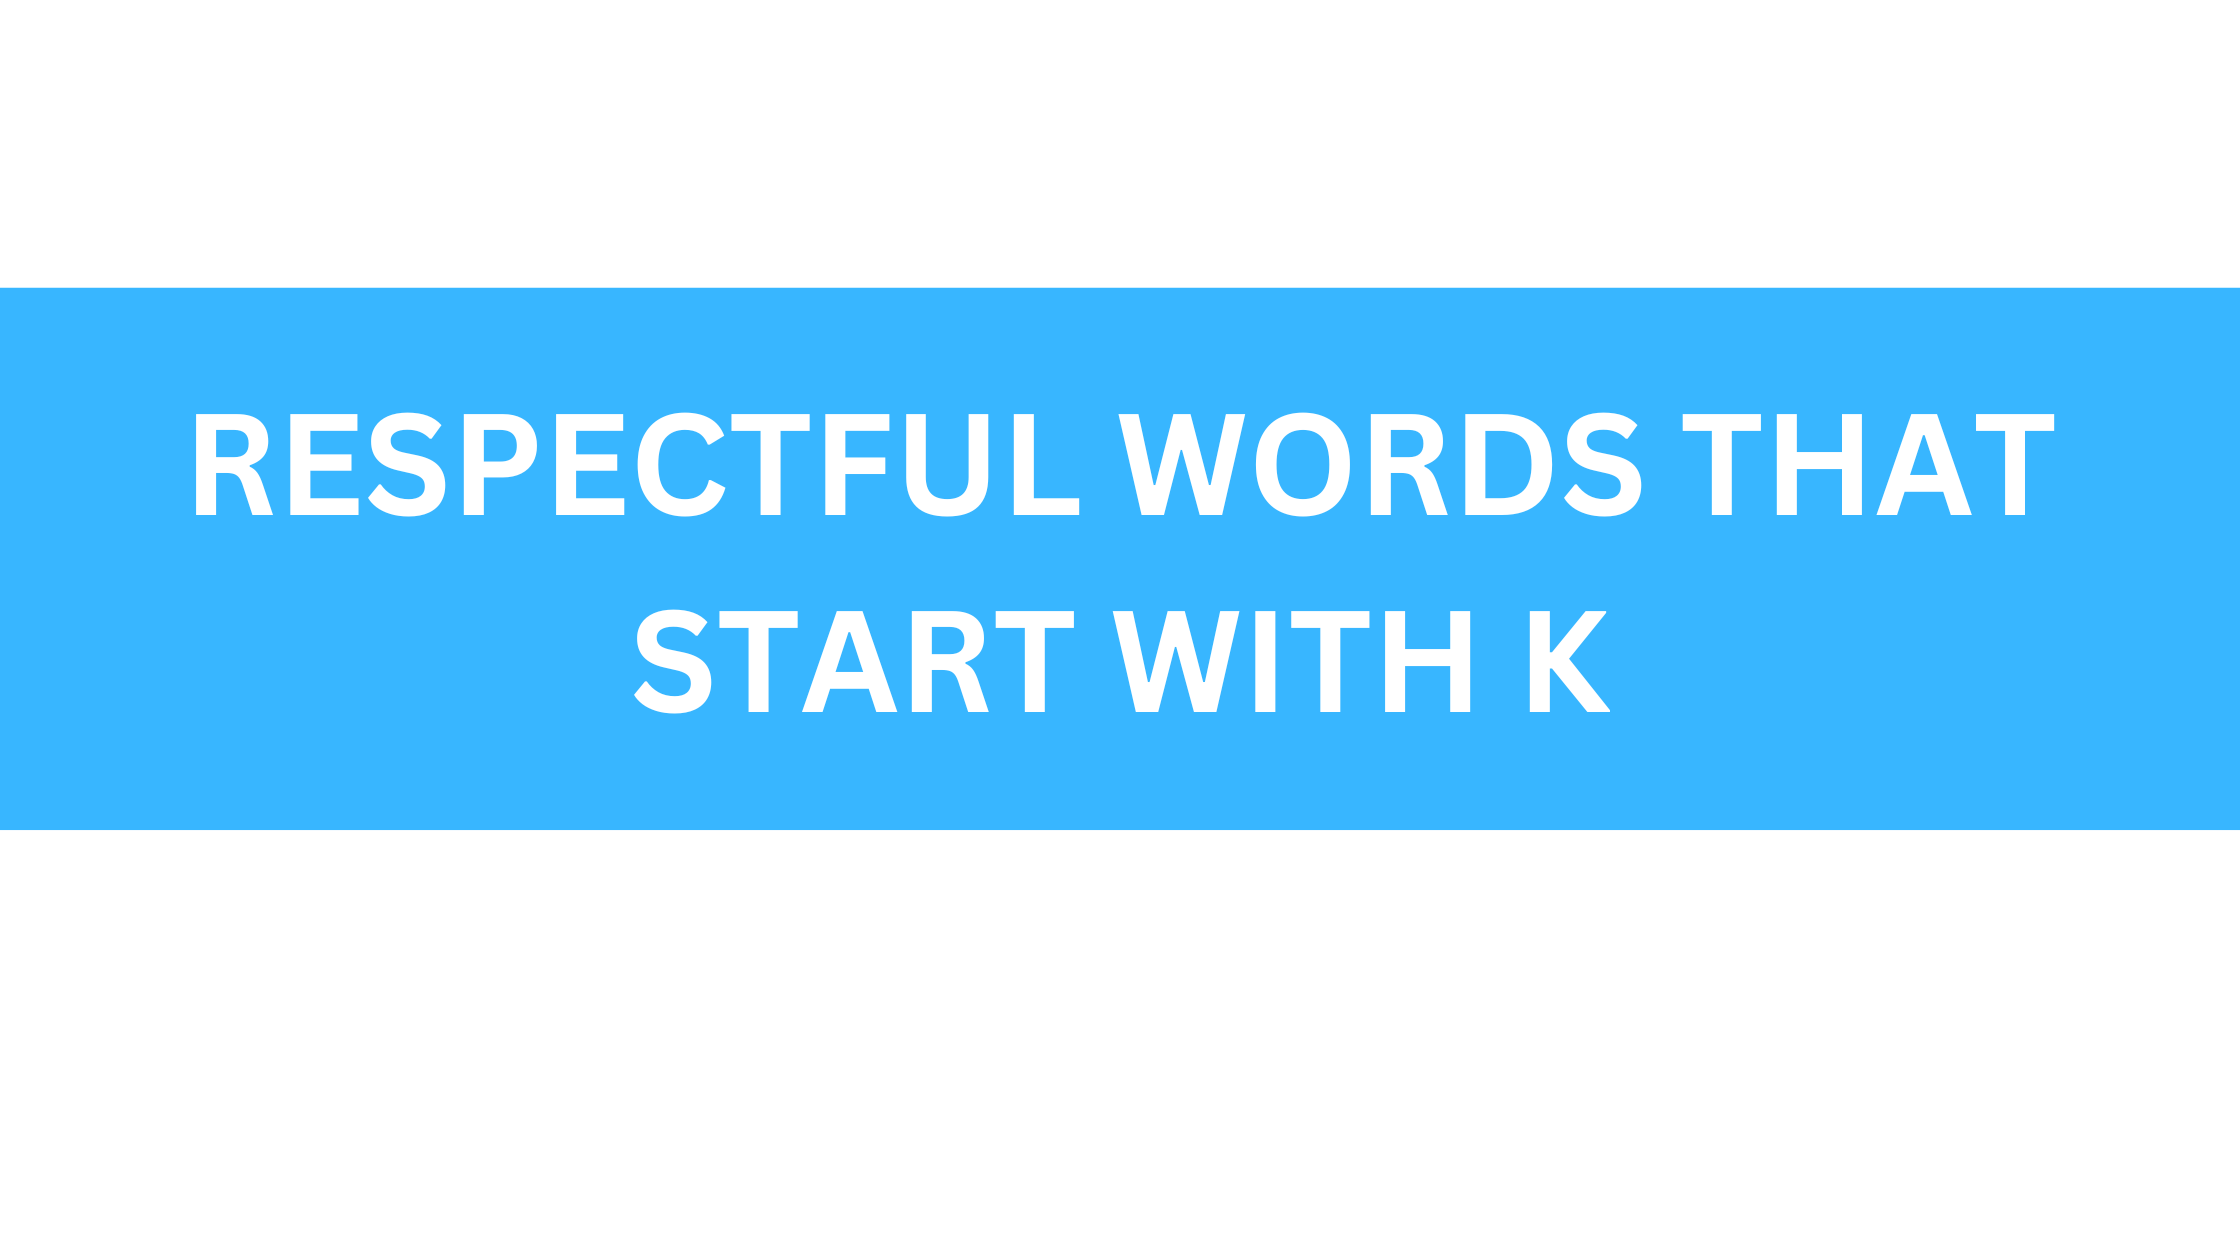 respectful words that start with k